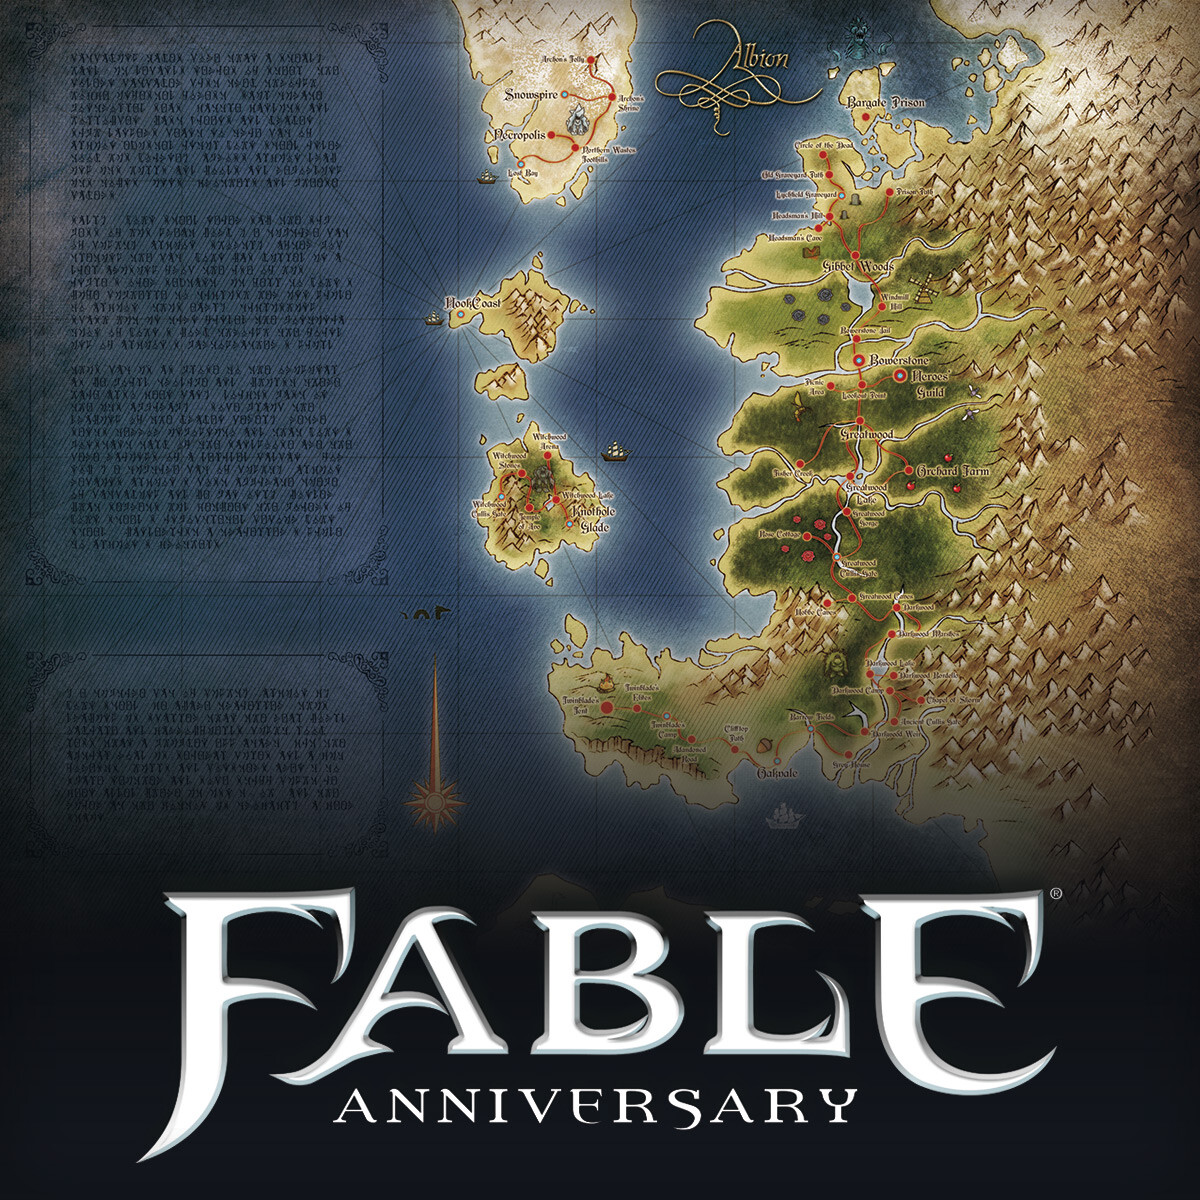 ArtStation Fable Anniversary Map, 58% OFF | www.formasup.fr